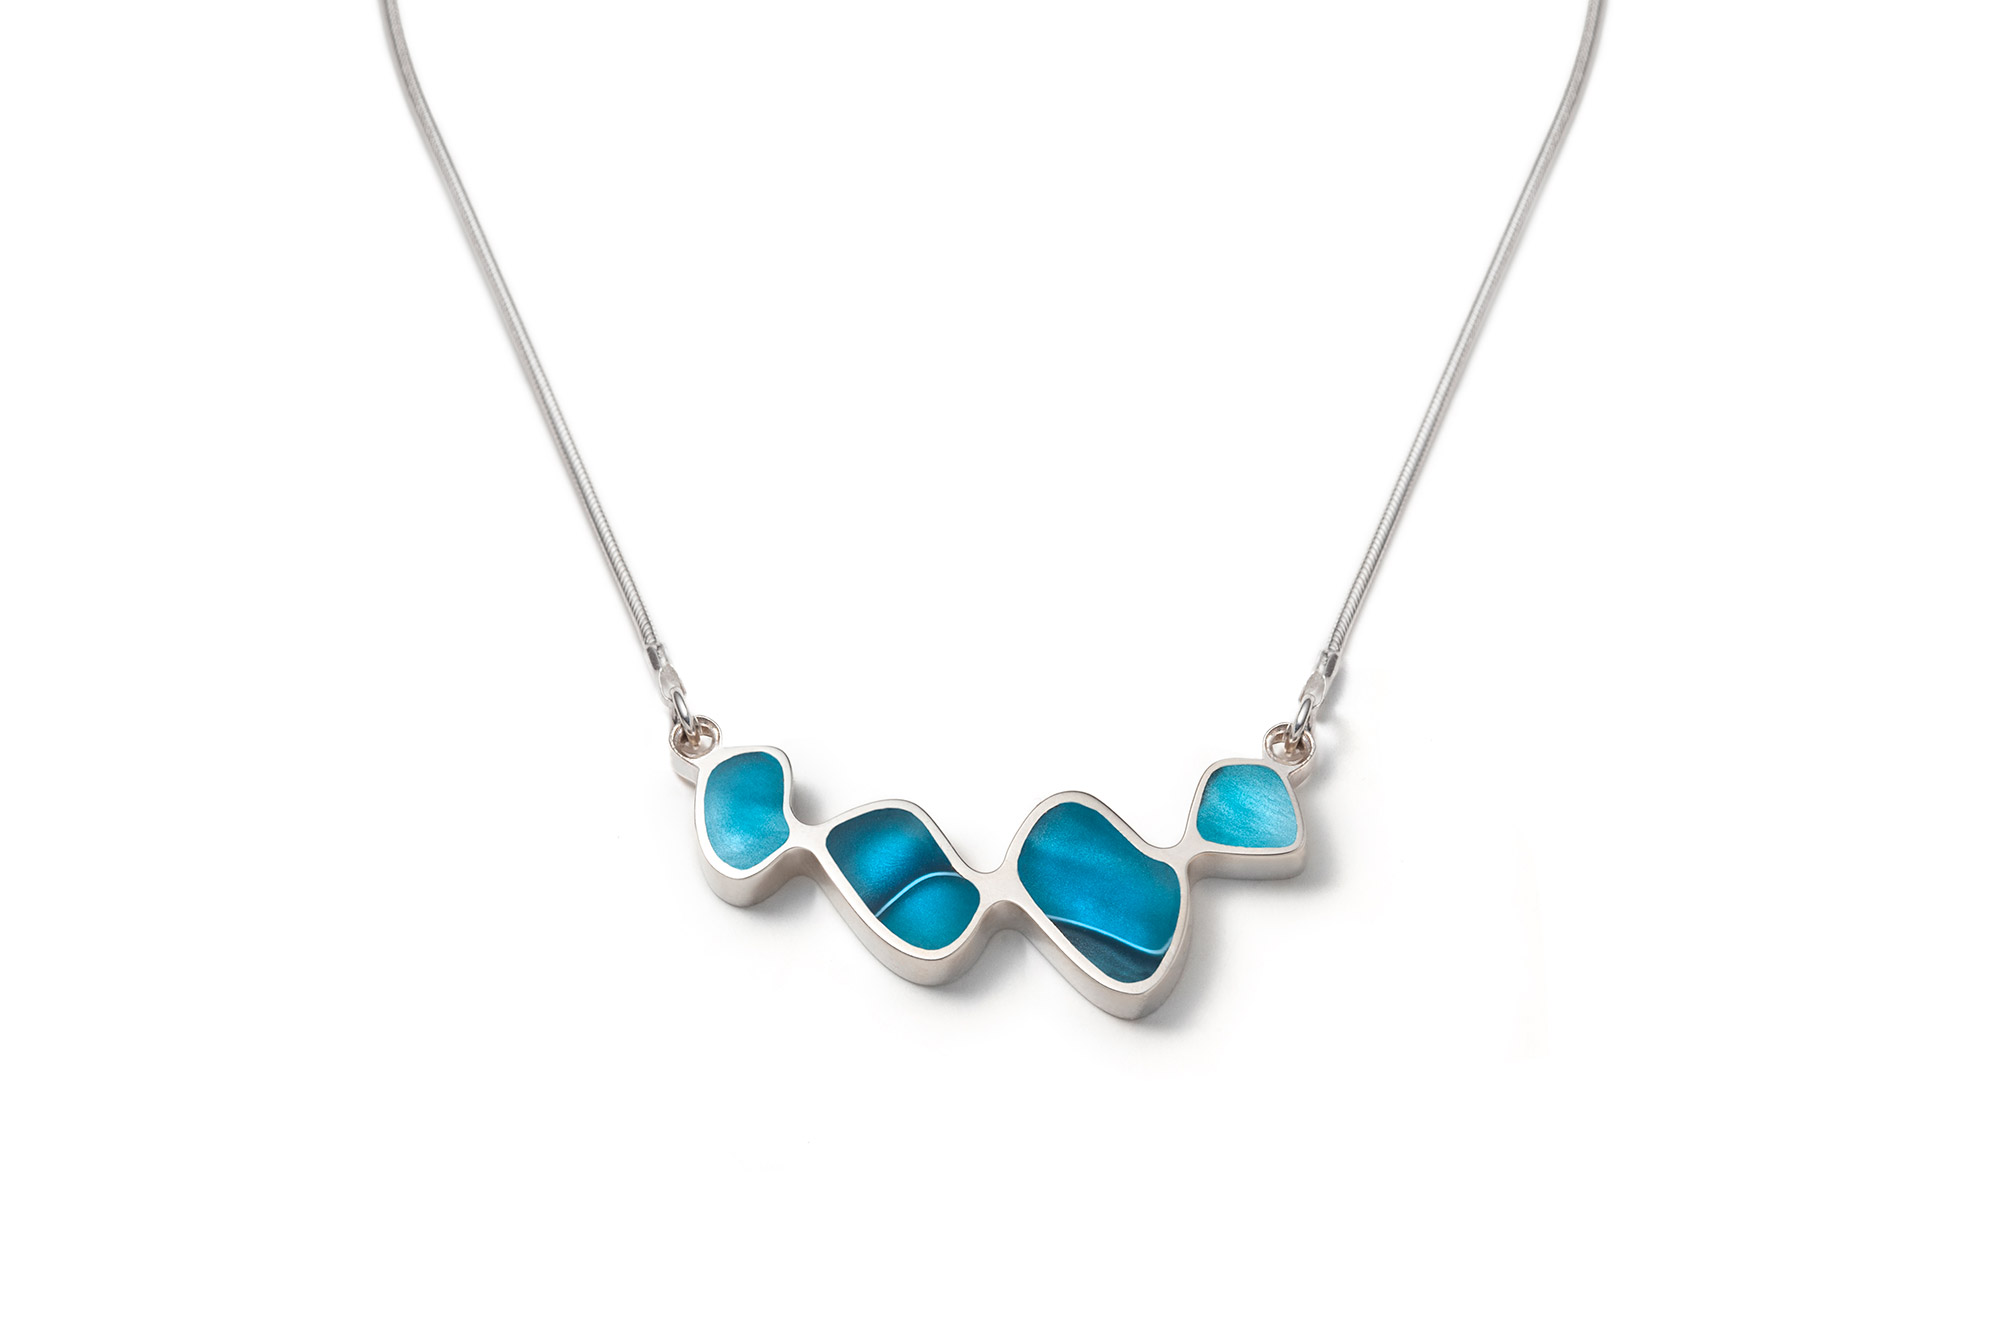 Turquoise and yellow cumulus reversible necklace